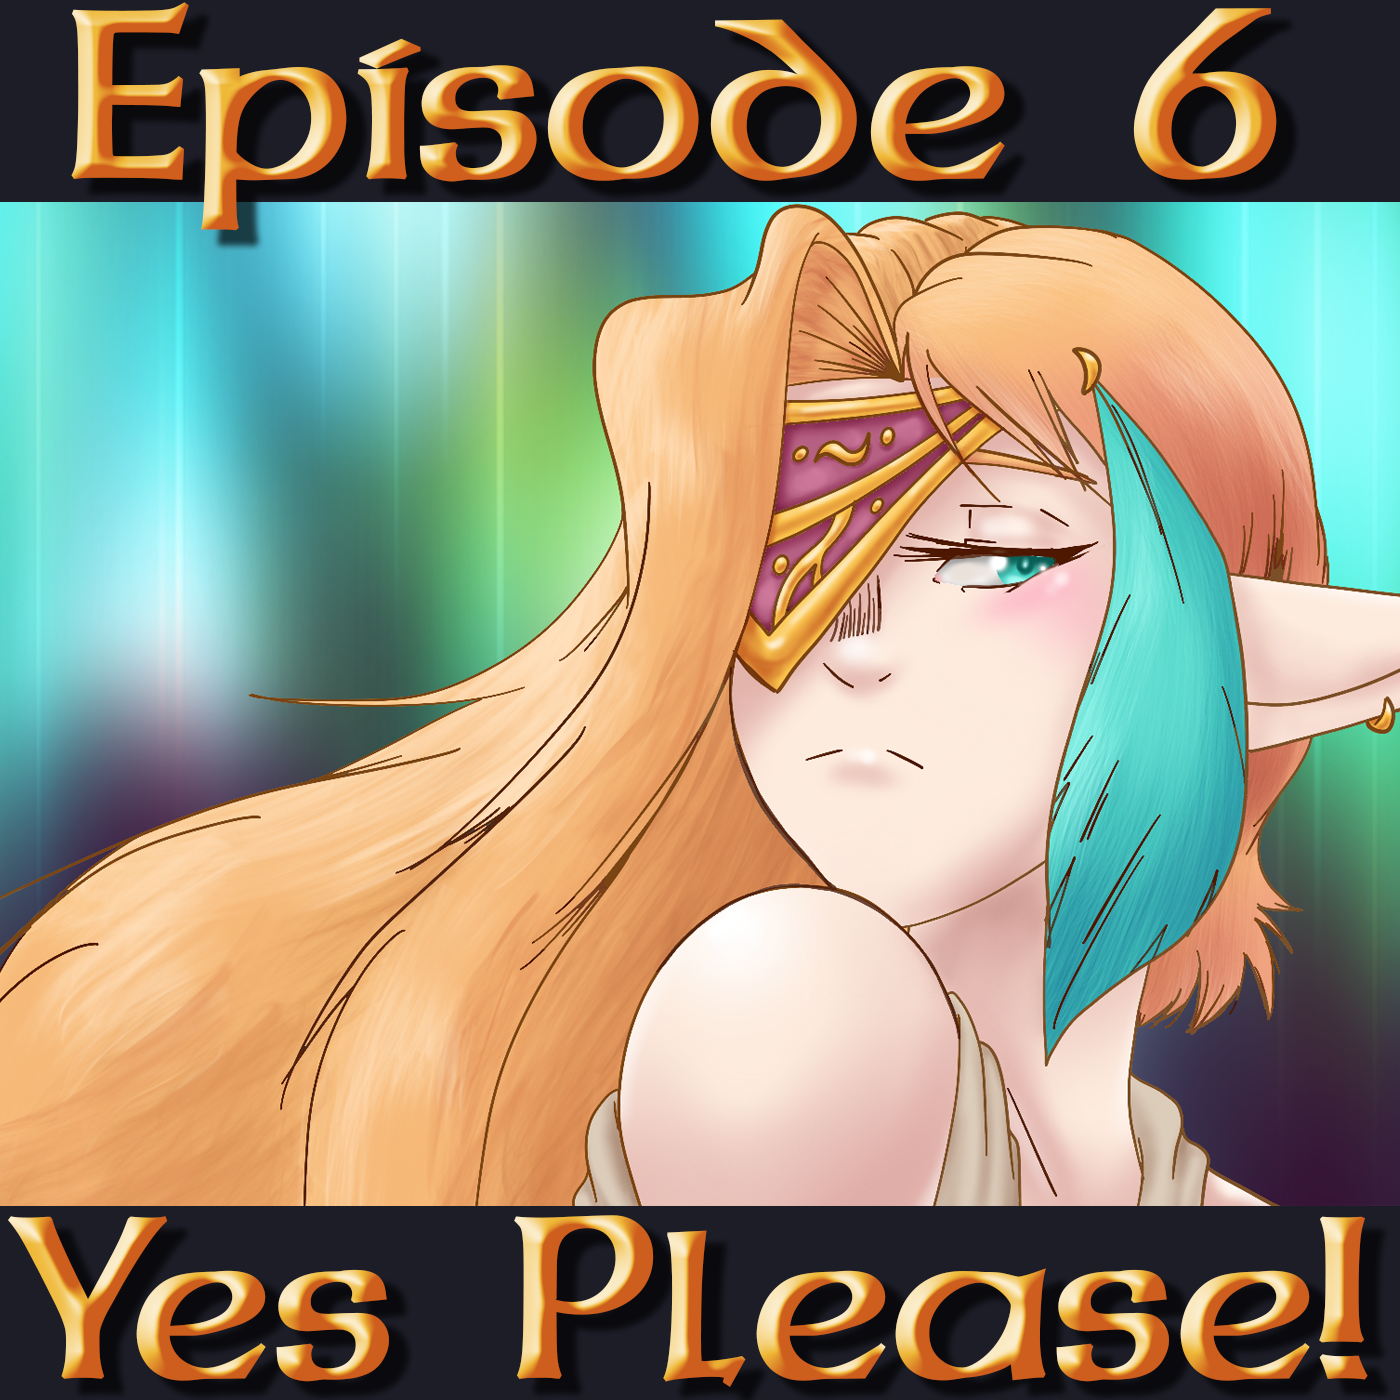 Yes Please! Episode 6: A Sticky Situation (Check Please! S1 E28.6)